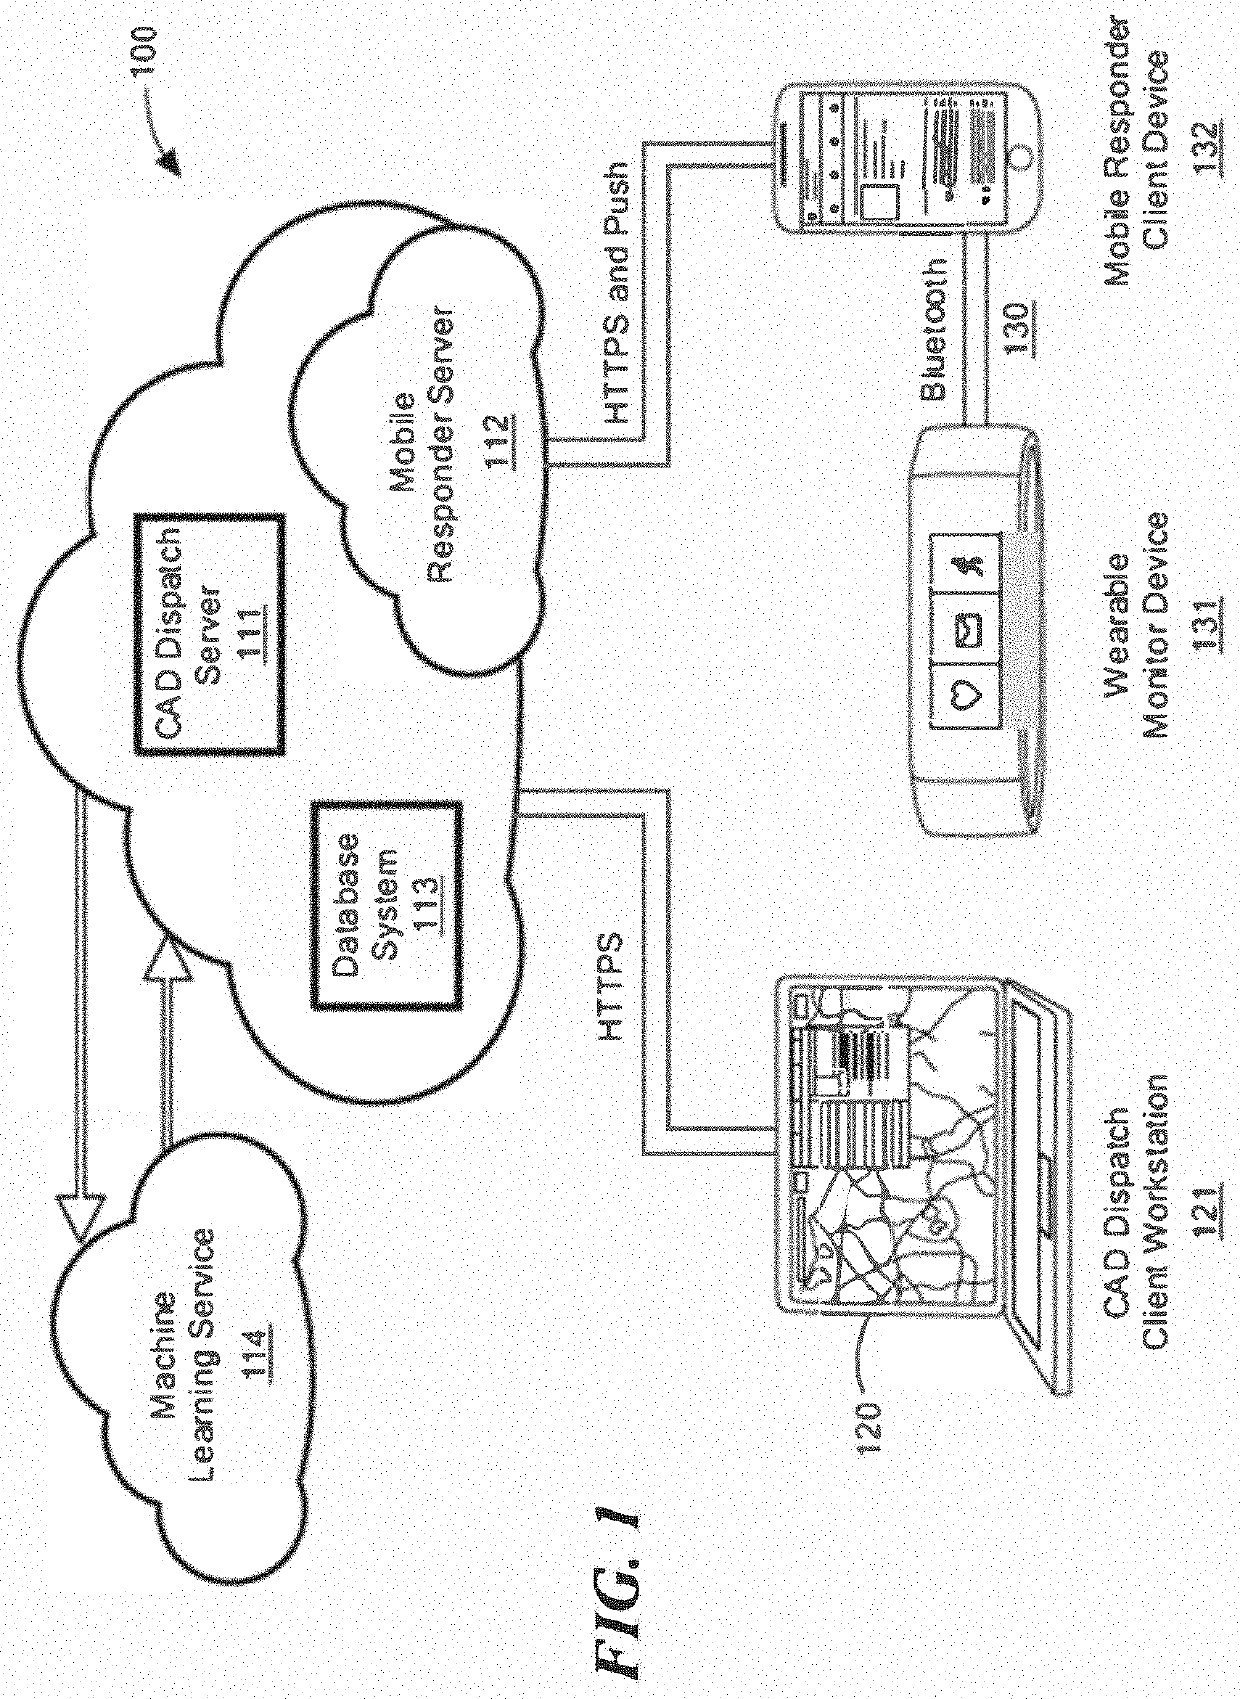 Pattern agent for computer-aided dispatch systems